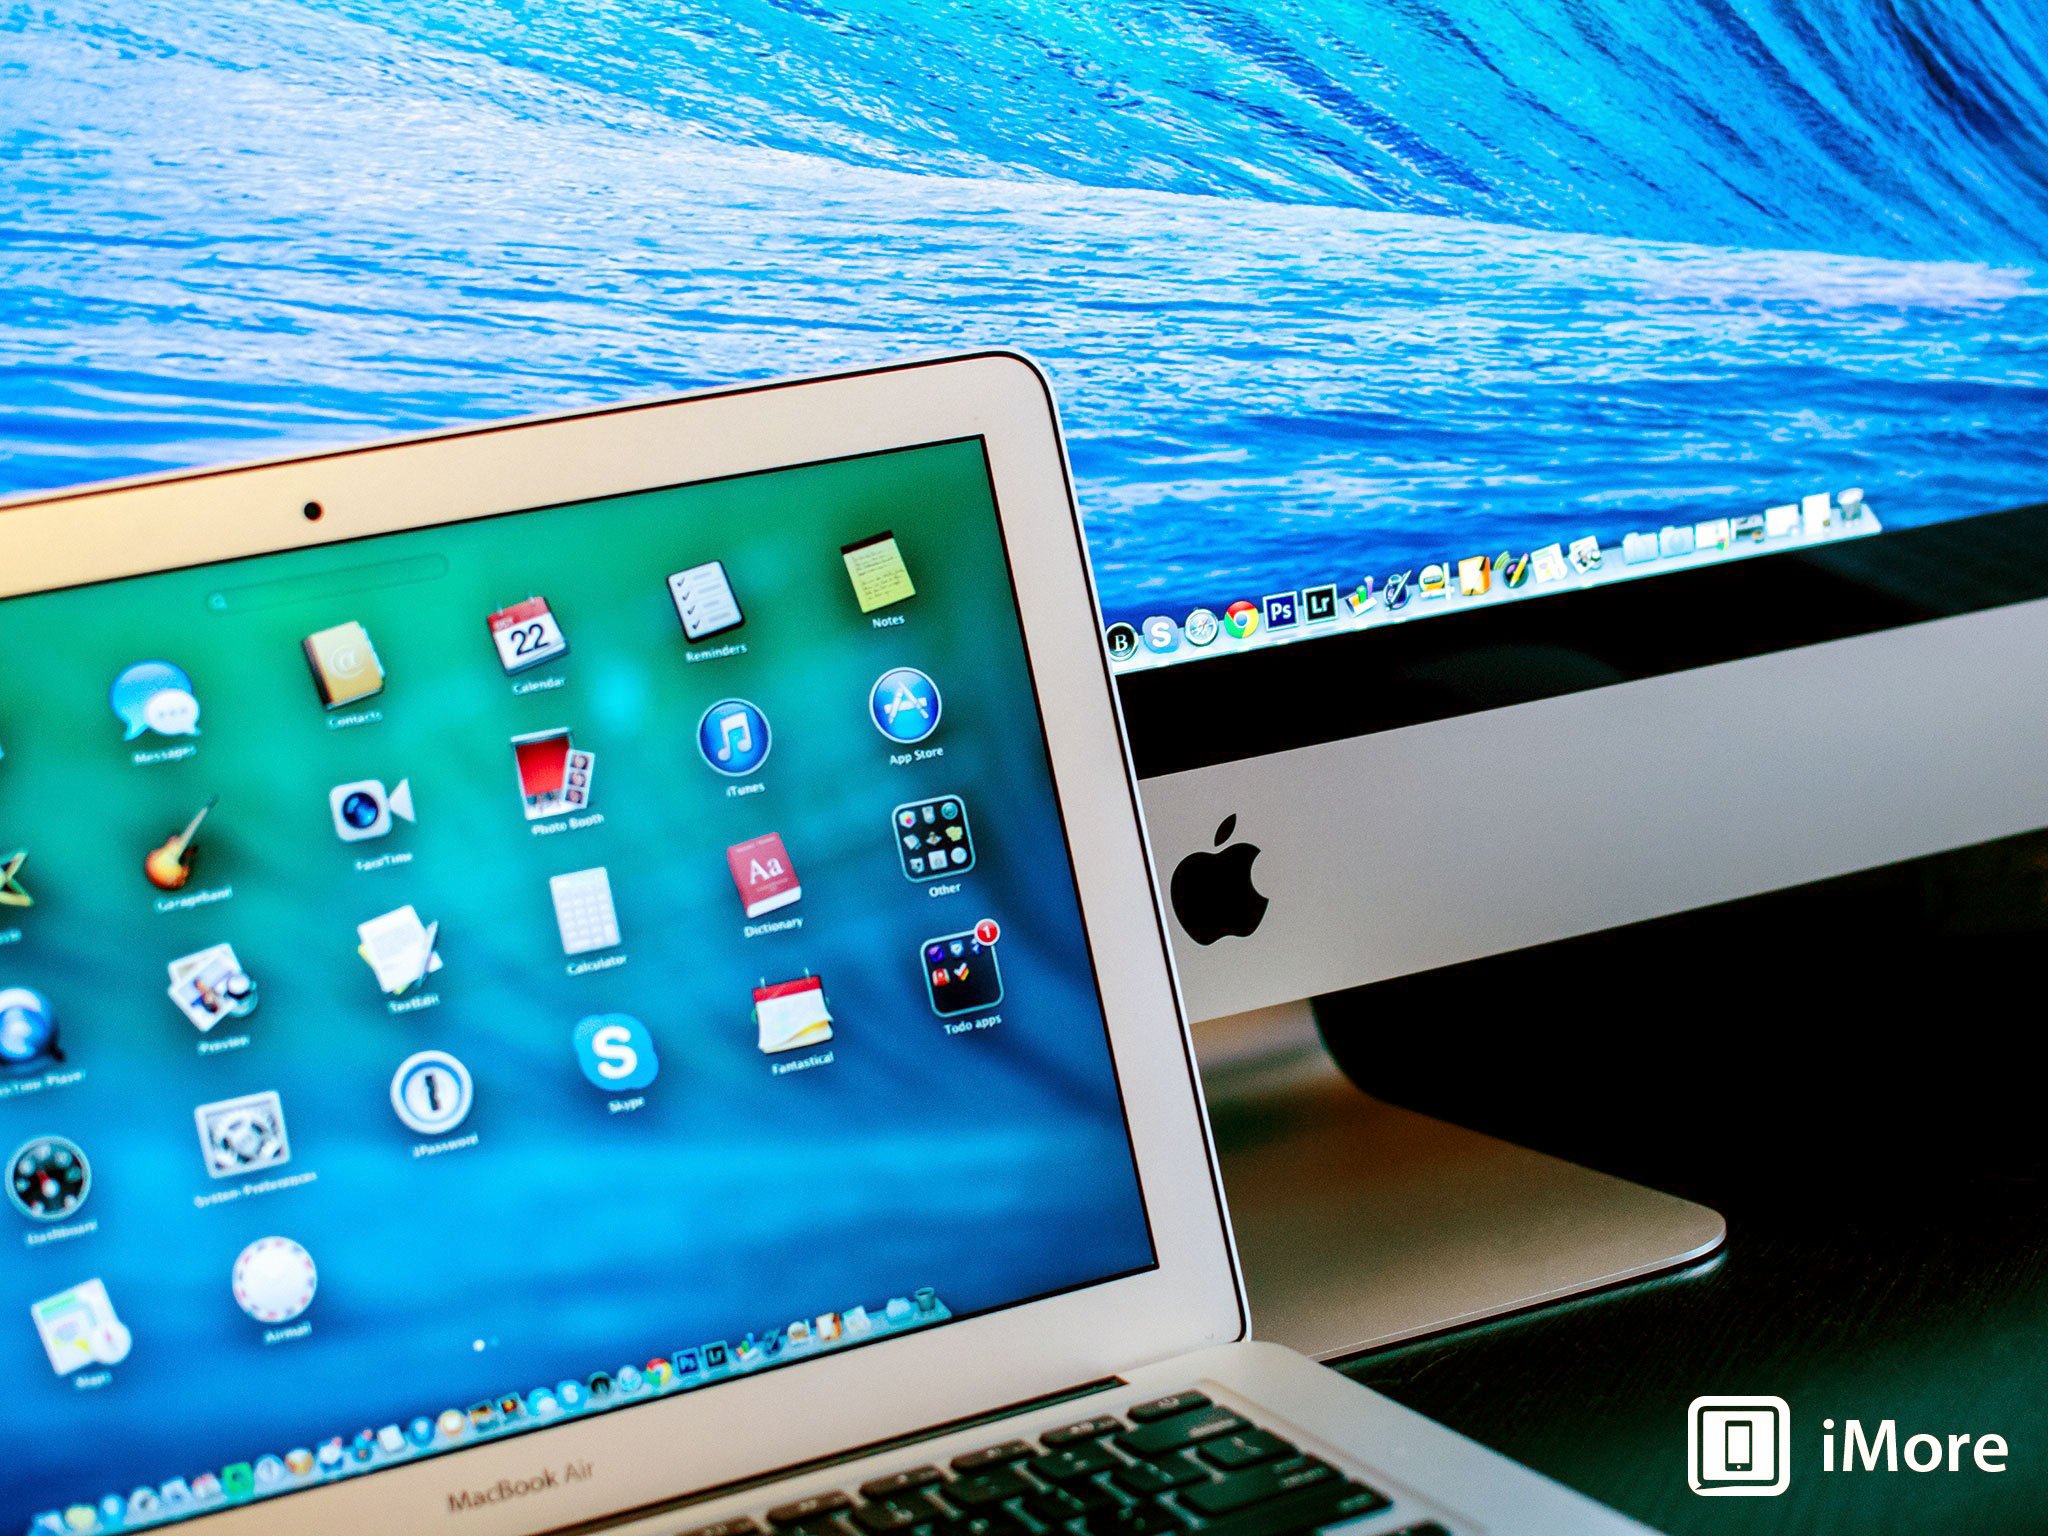 OS X Mavericks 10.9.2 pre-release now available for developers